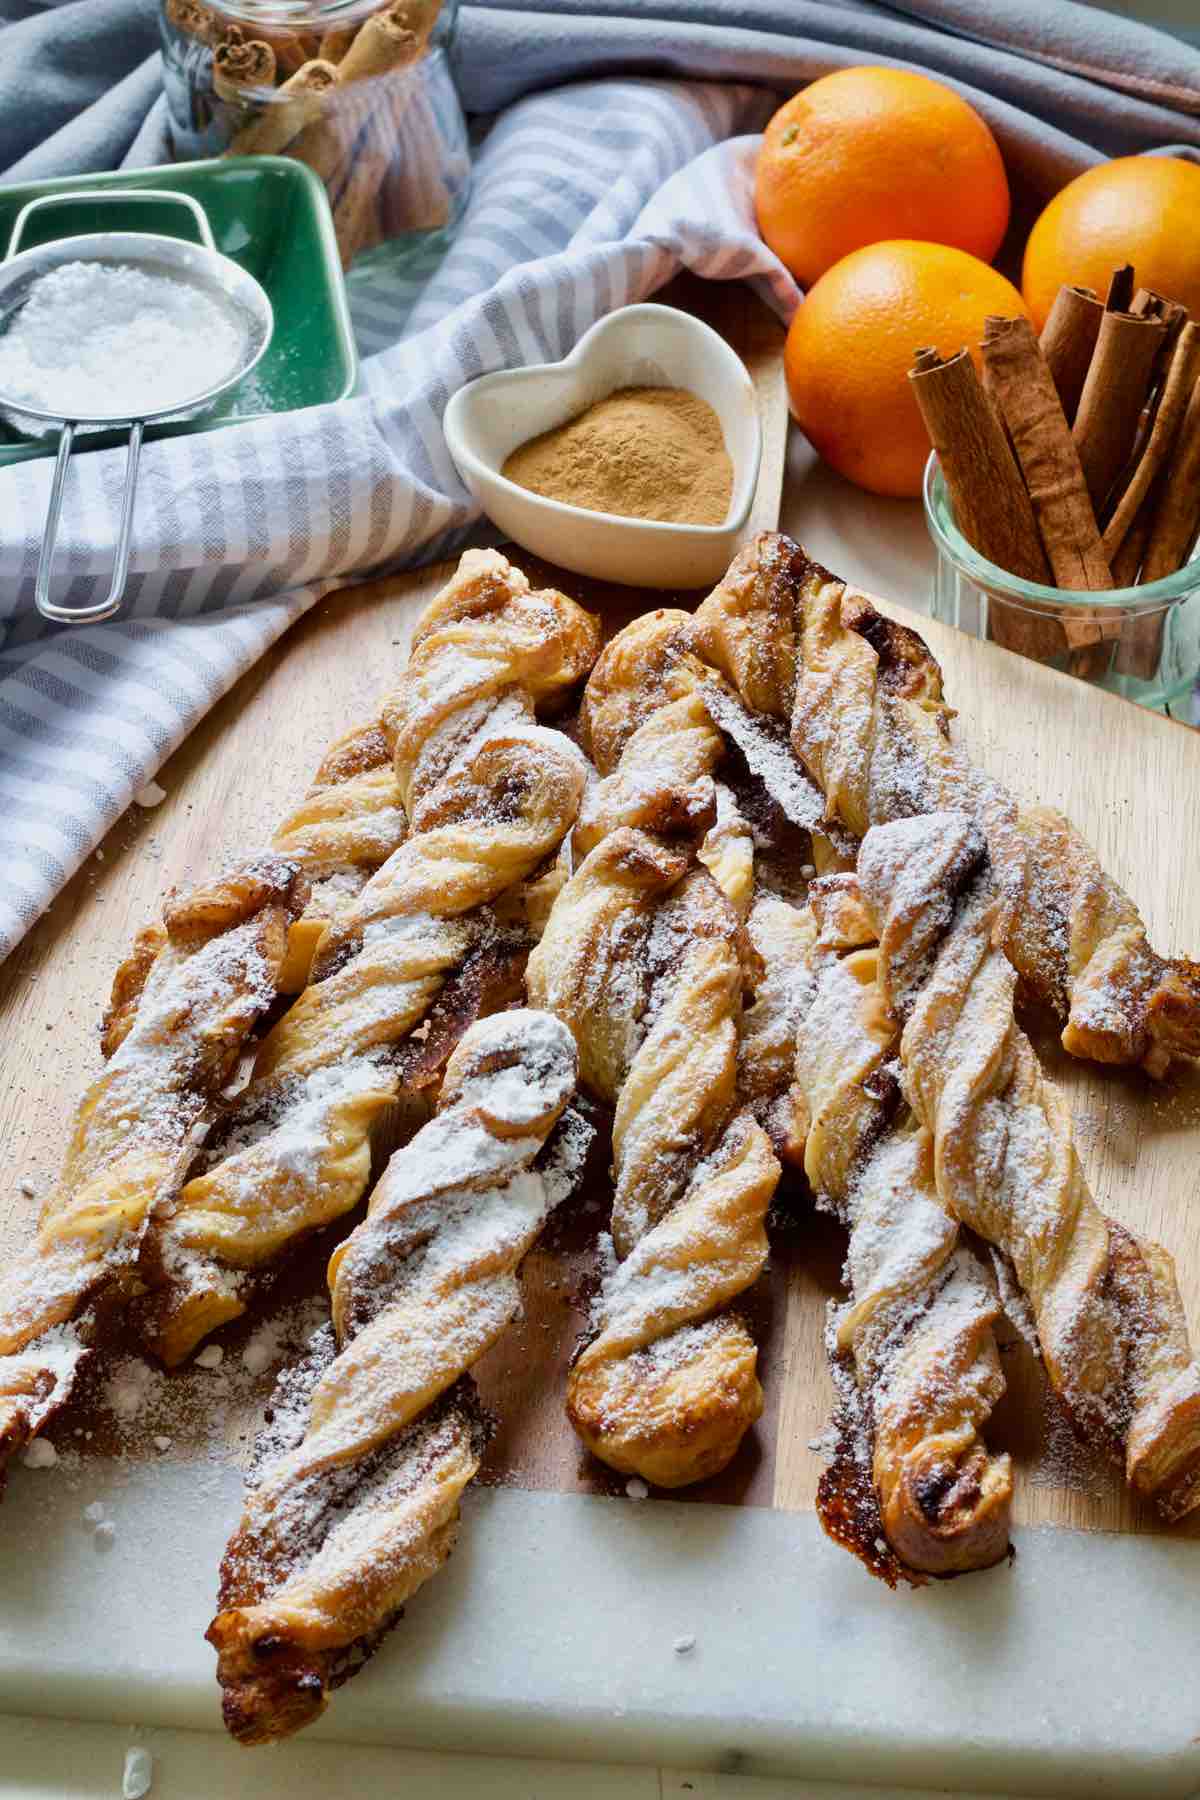 Puff pastry cinnamon twists on the board.